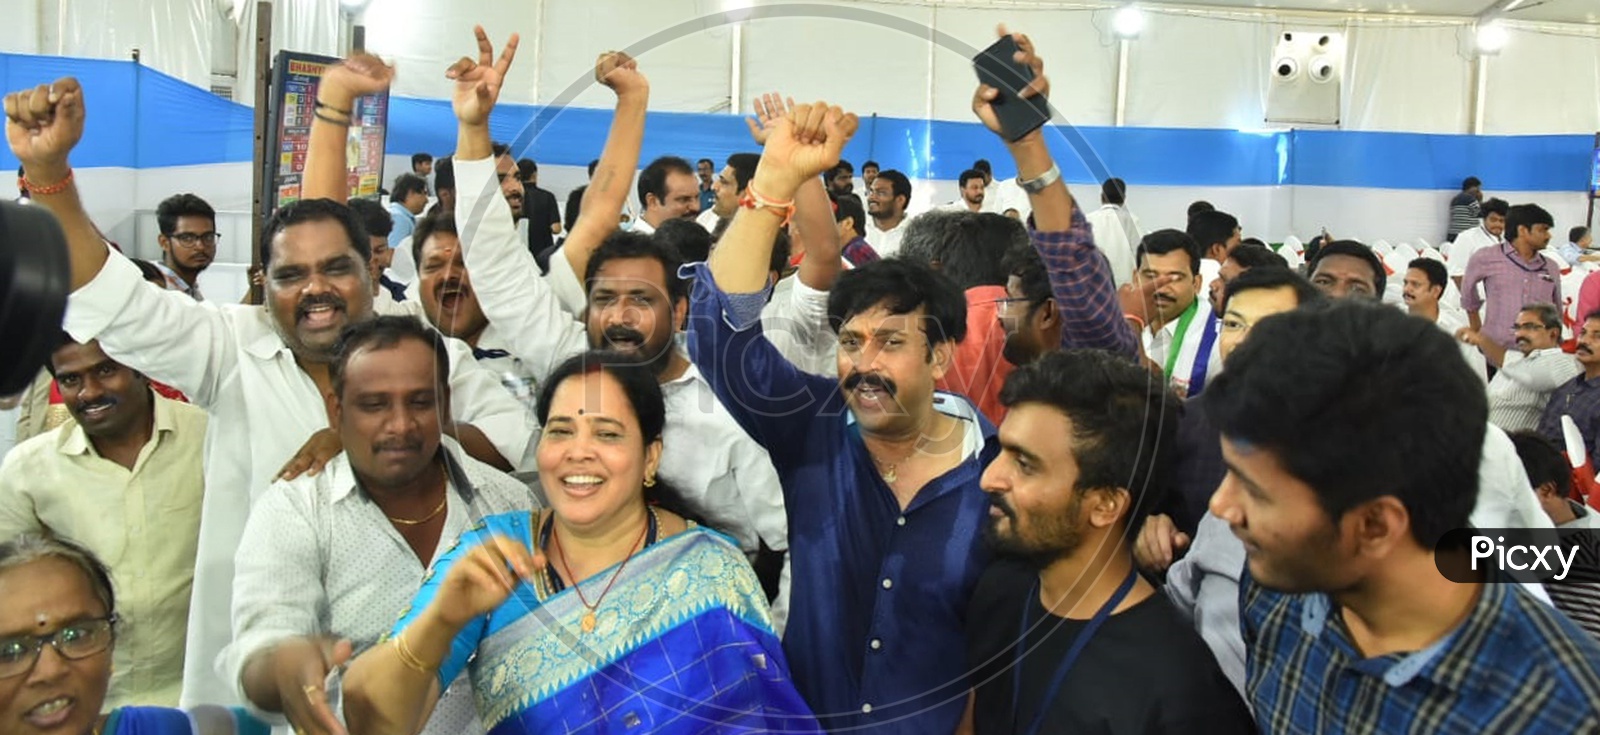 YSRCP Party Supporters cheering after elections 2019 at Tadepalli